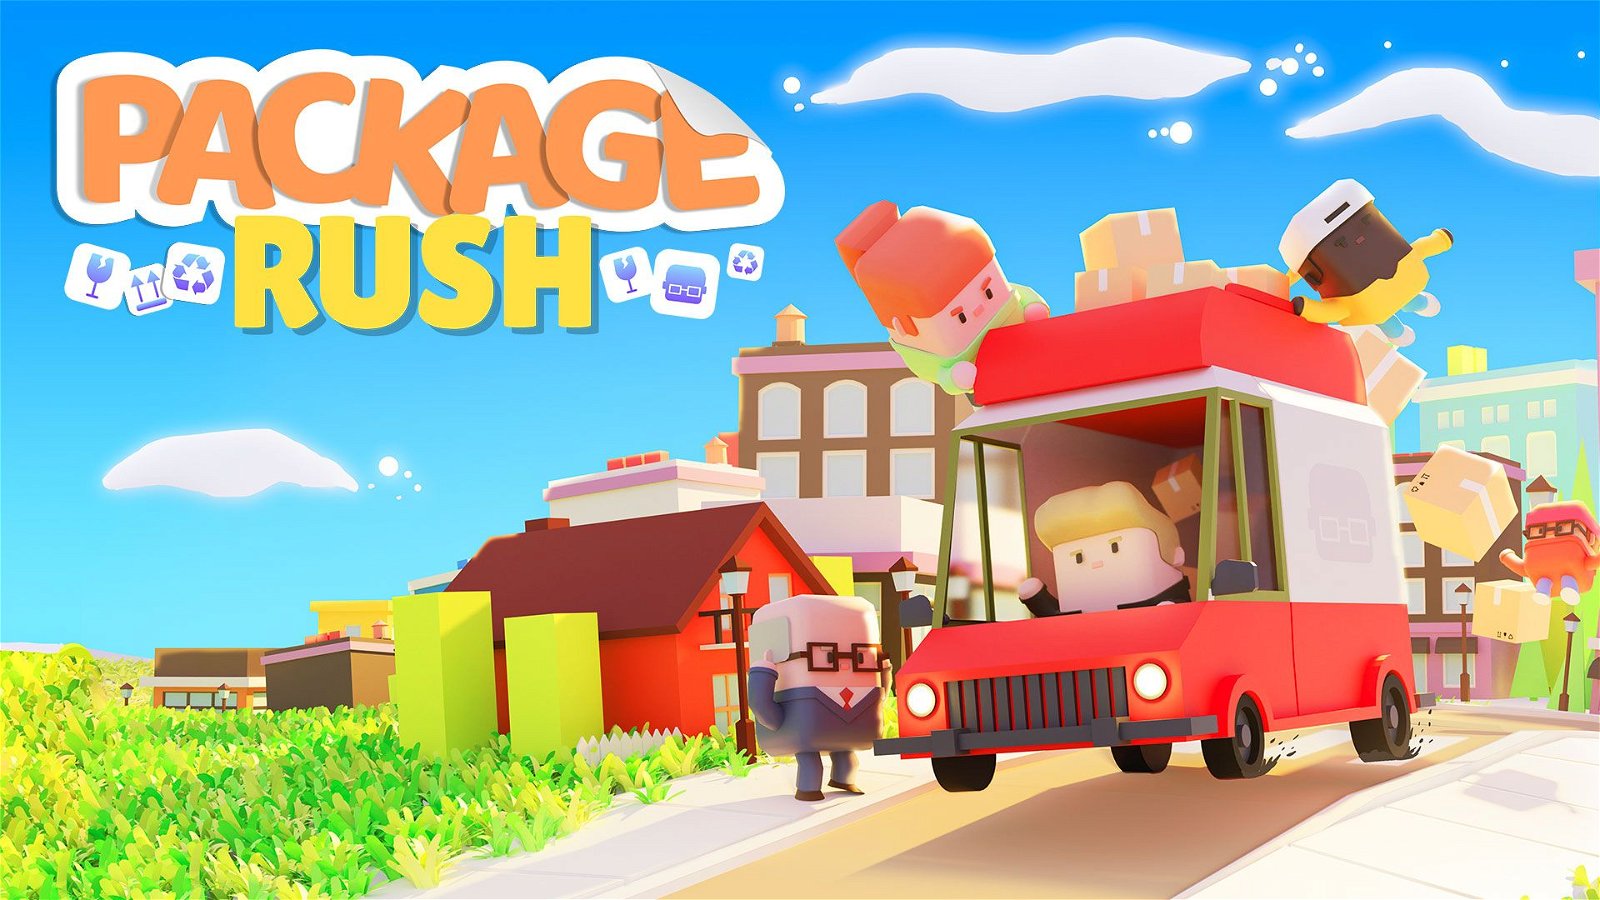 Image of Package Rush